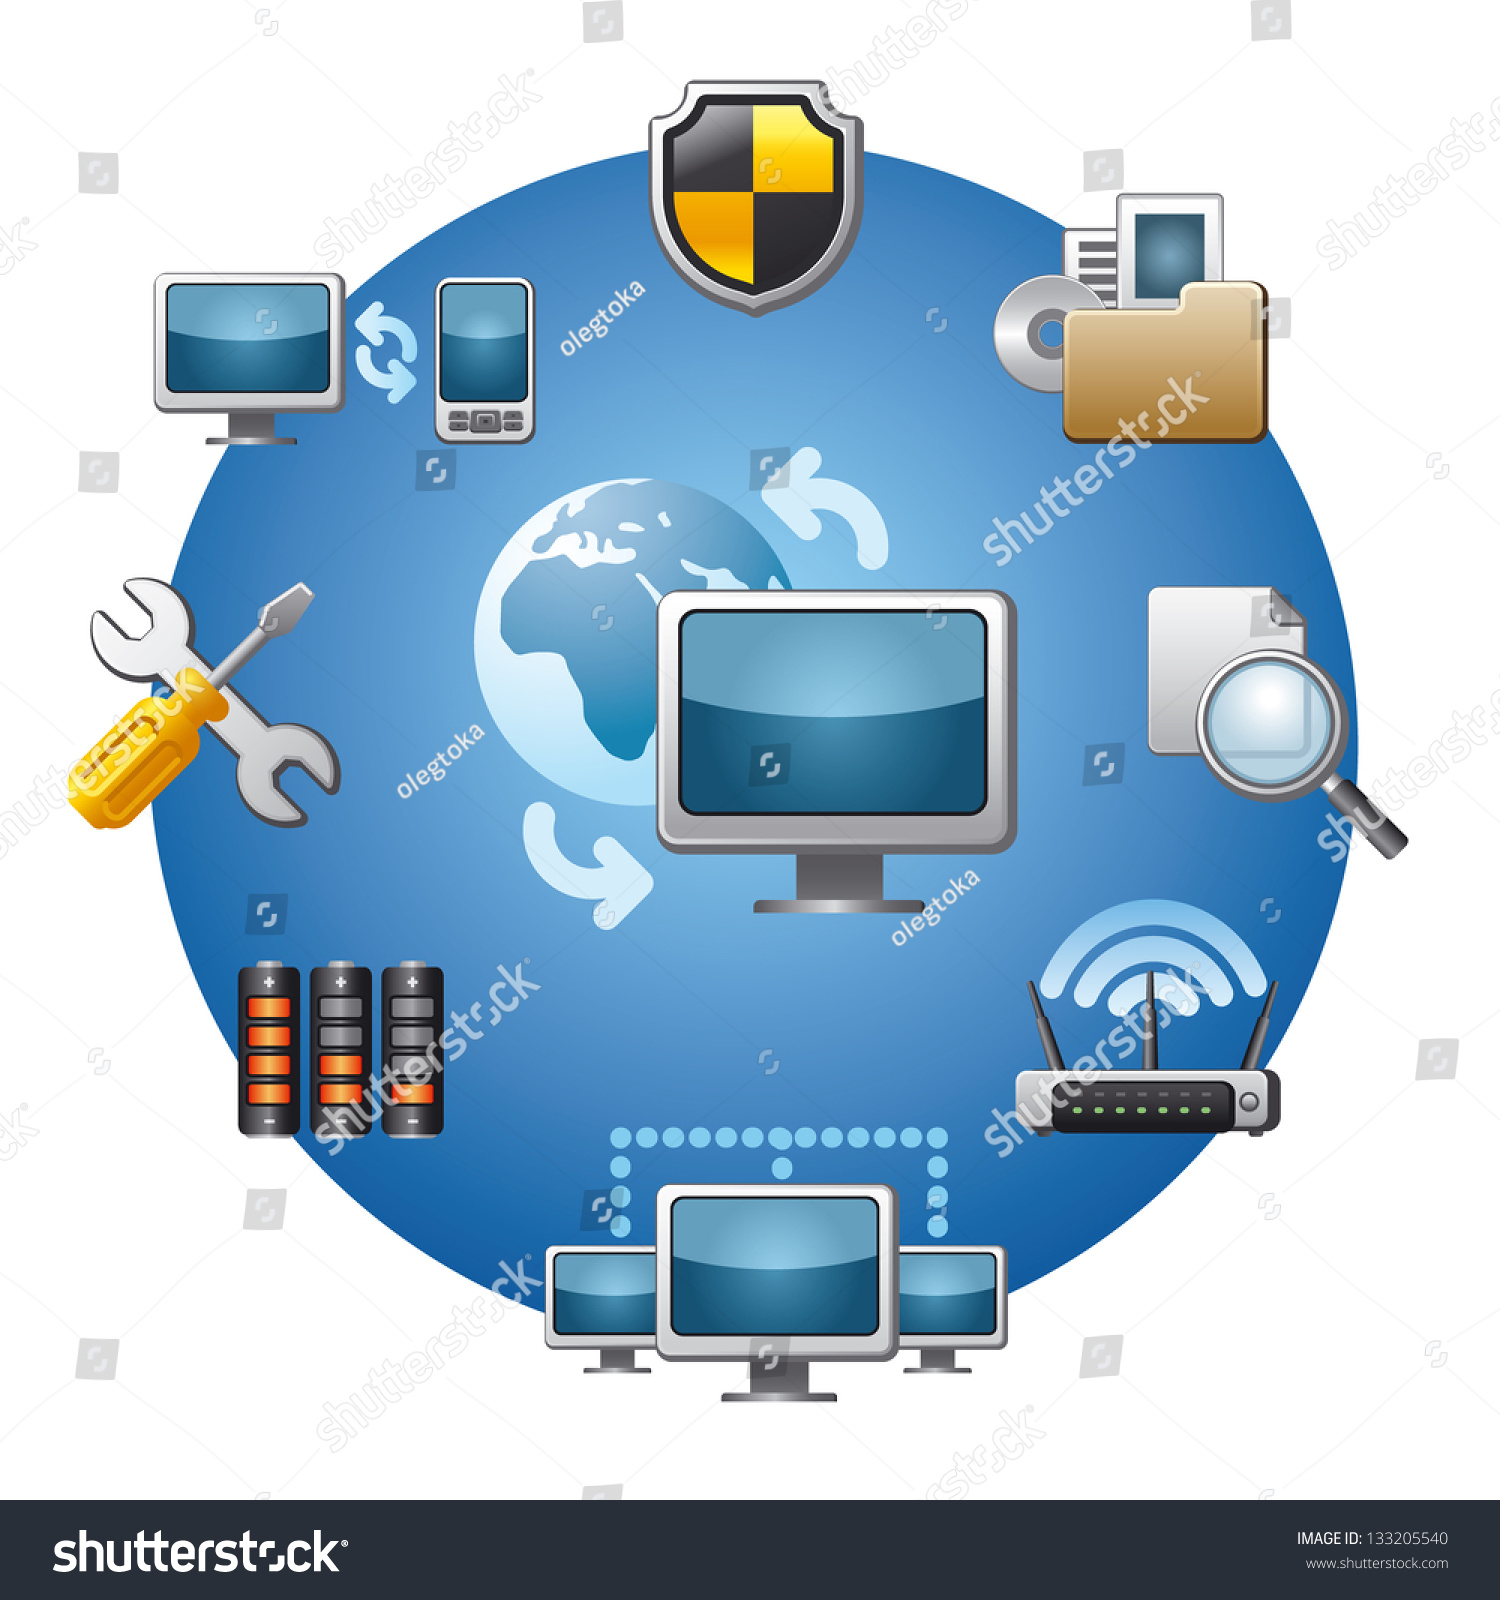 computer networks clipart - photo #32